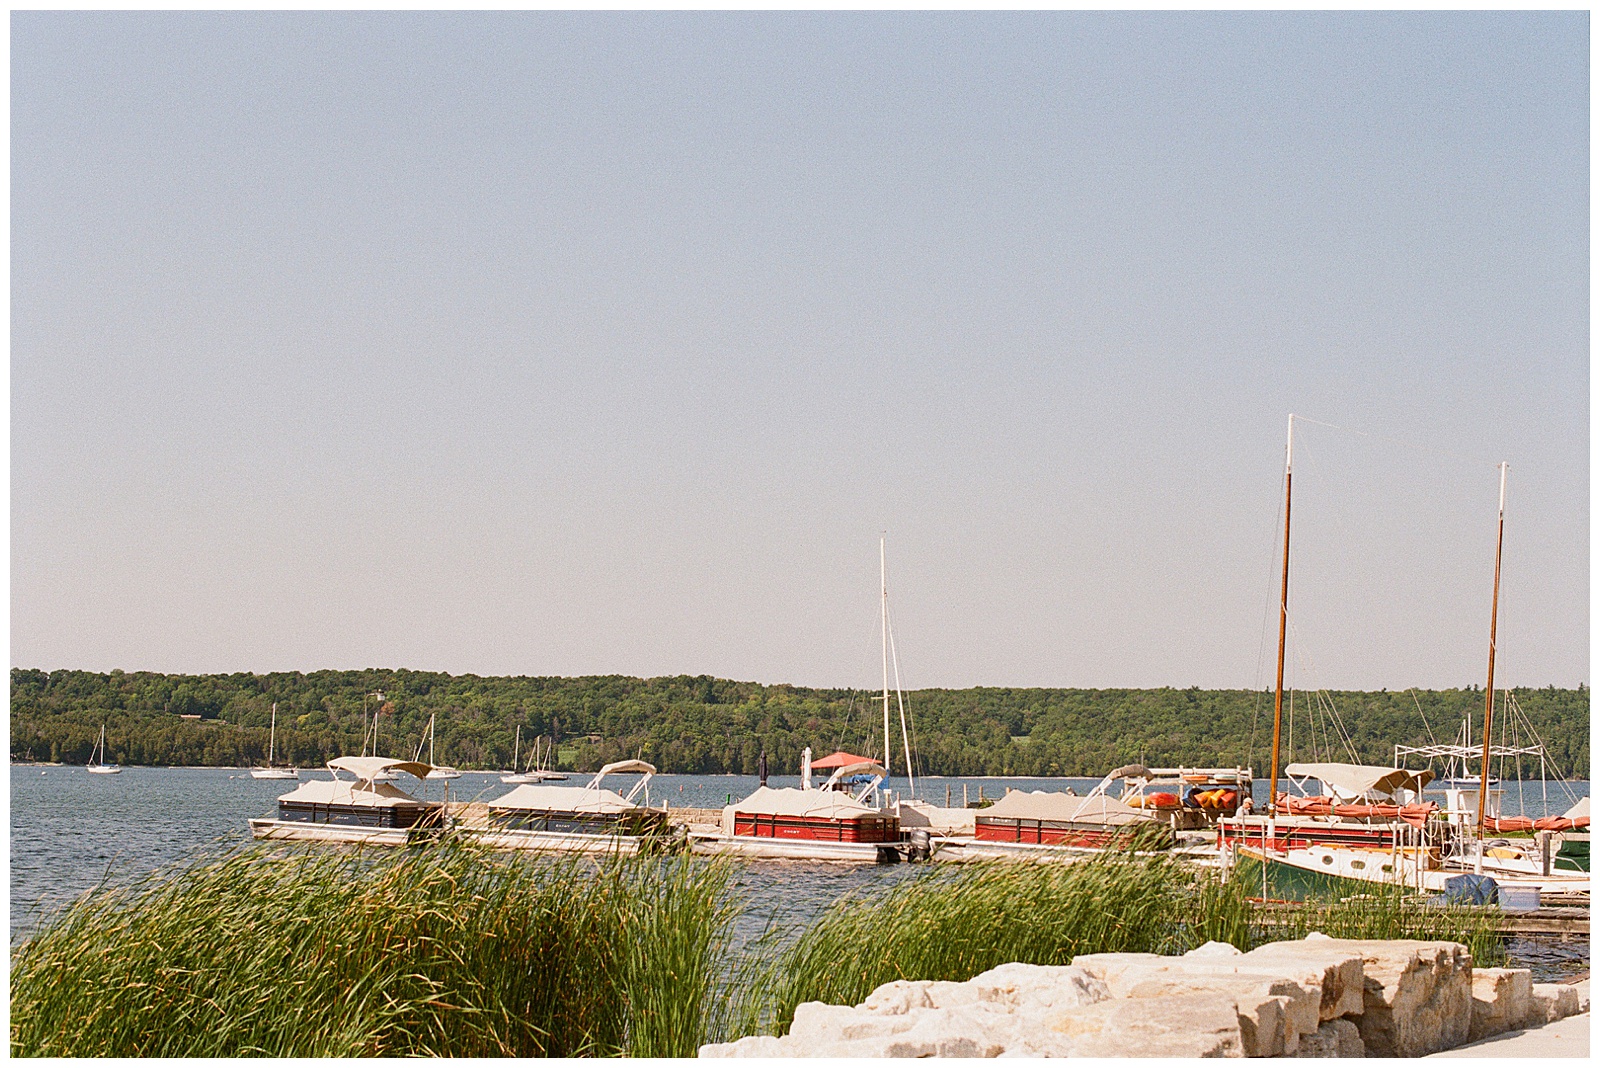 Lake Michigan and boats docked along Nicolette Bay in Door County